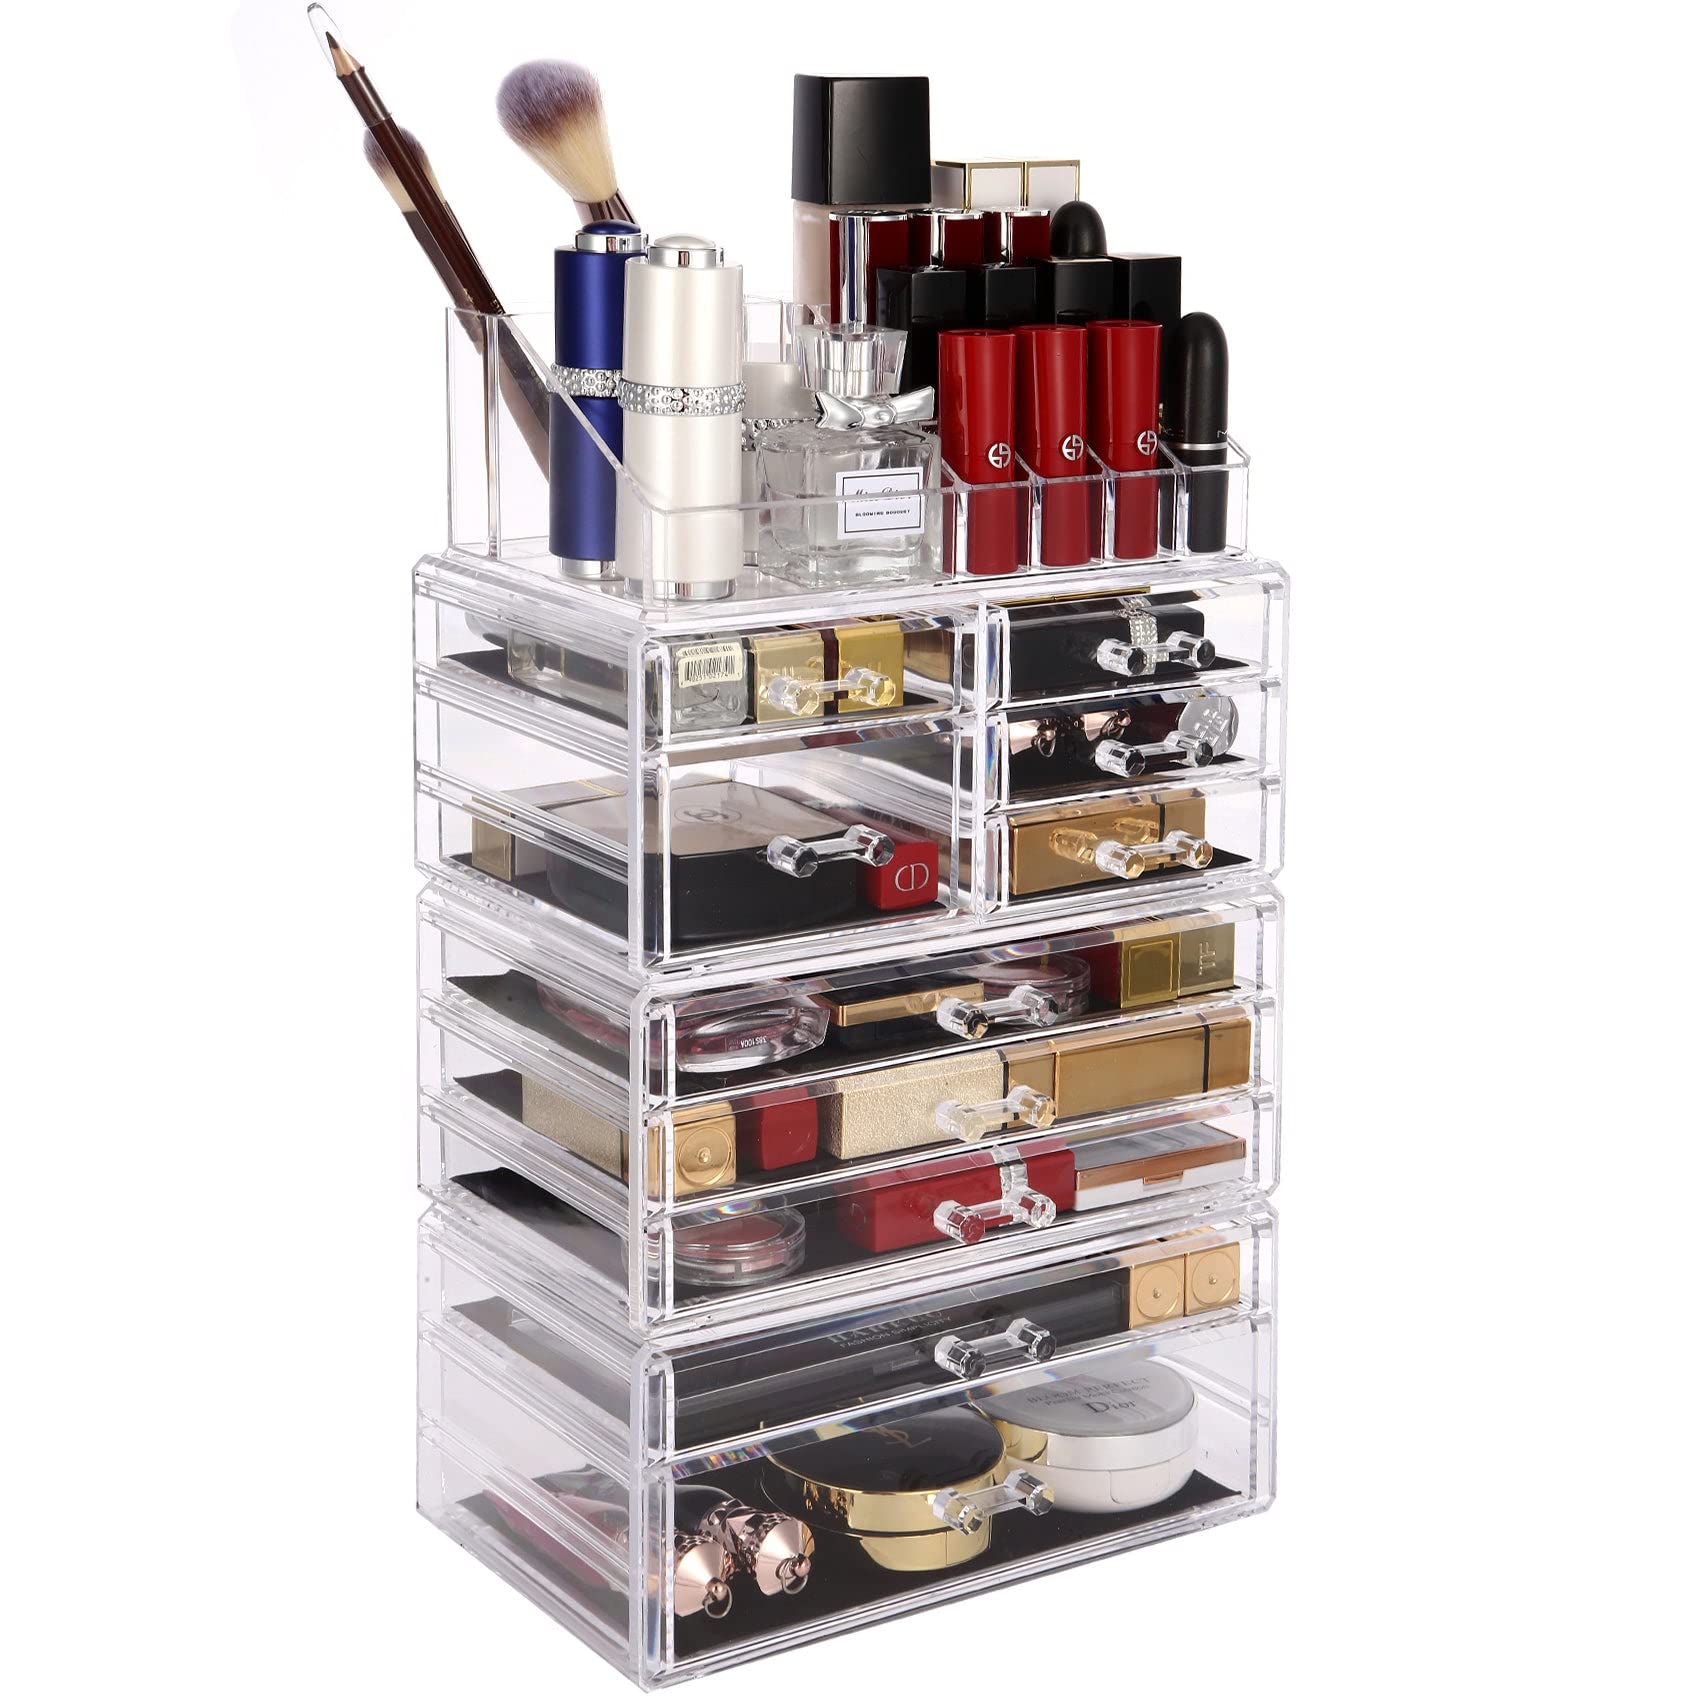 Cosmetic Storage Organizer, Makeup Organizer Case, ROSELIFE [THCA] 4 Pieces Kit Jewelry Display, 10 Drawers, 16 Slots, Detachable, Free Combination...